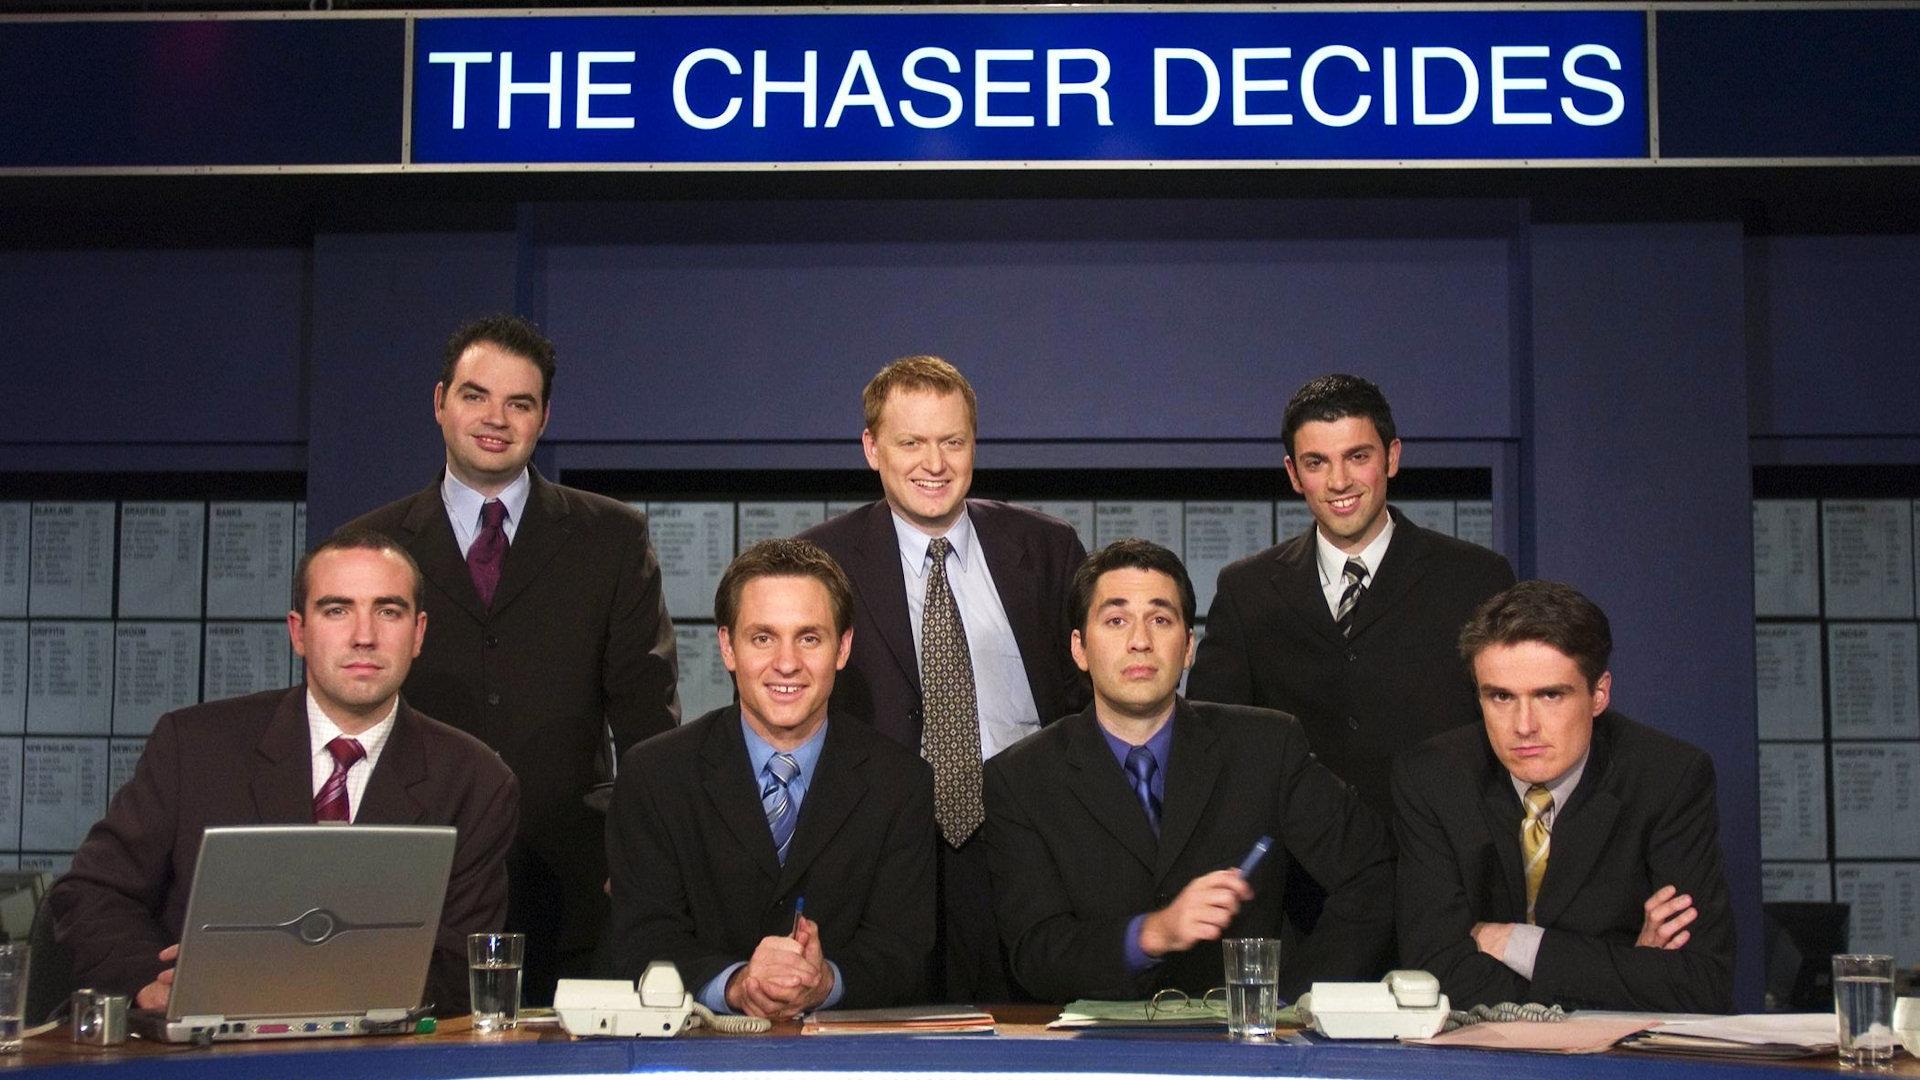 The Chaser Decides